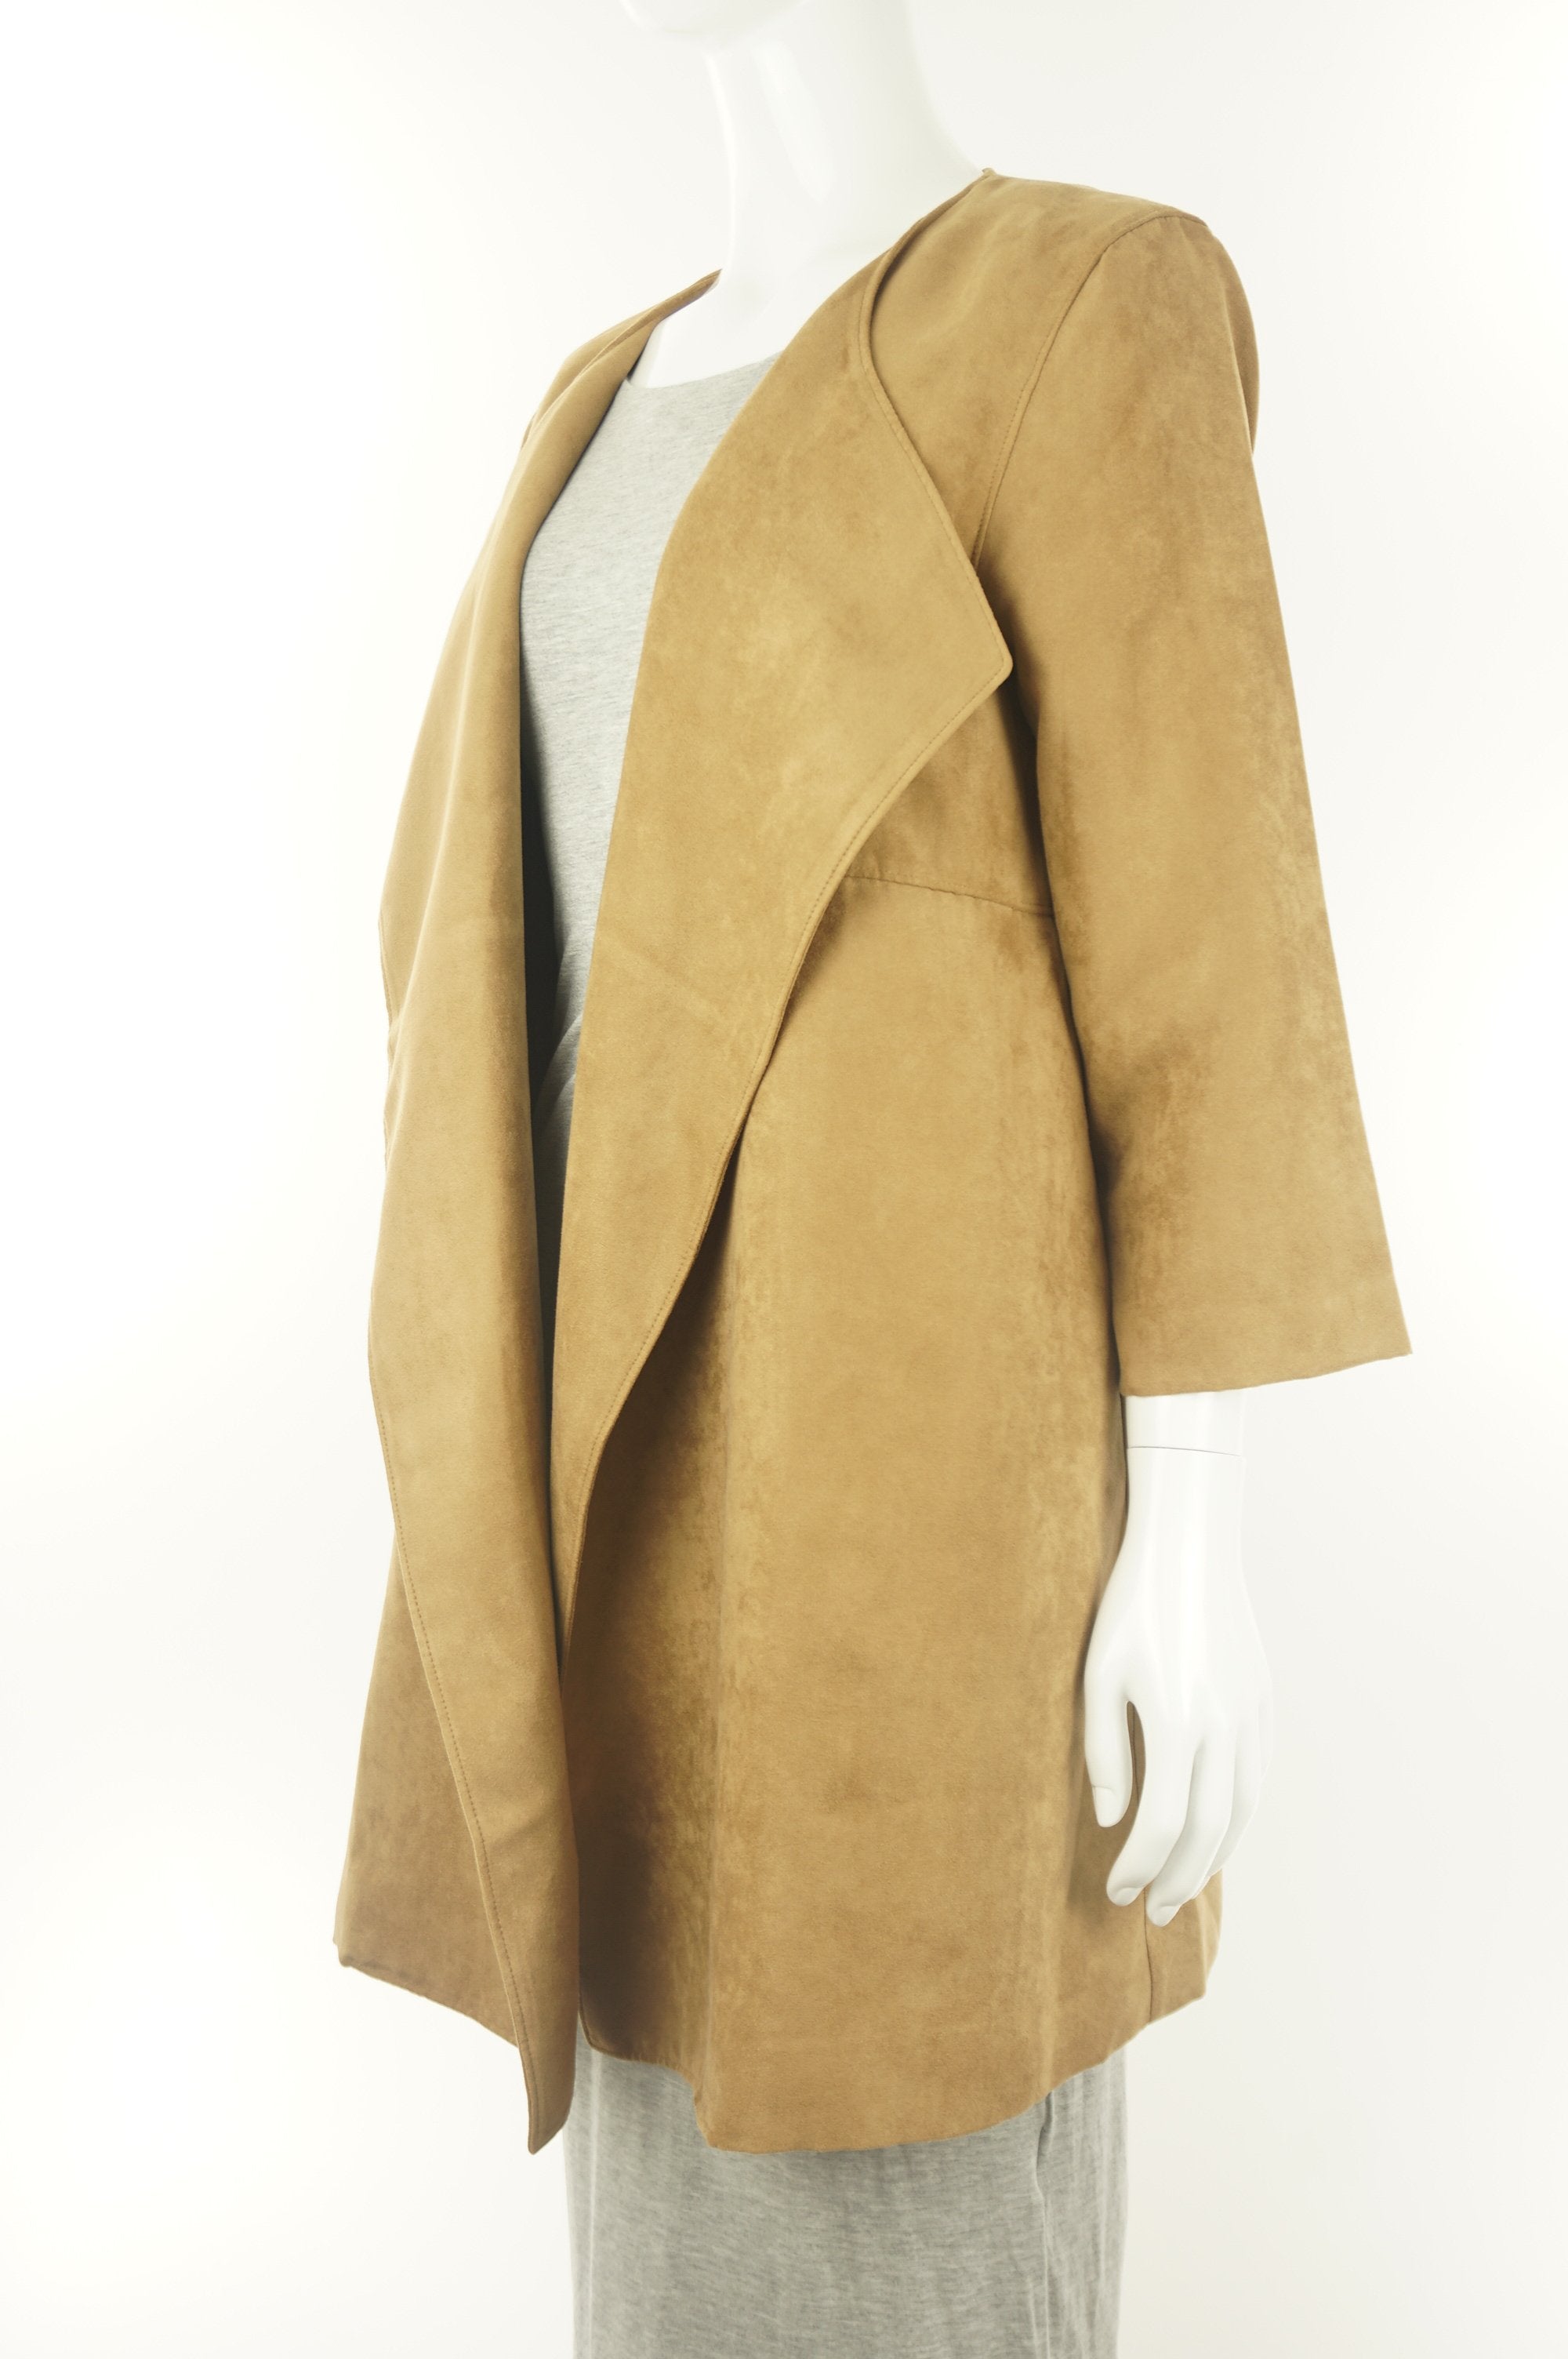 H&M Faux Suede Cardigan, The kind of cardigan you throw on super quickly before going out, just in case the weather is not as warm;), Brown, 100% polyester, women's Jackets & Coats, women's Brown Jackets & Coats, H&M women's Jackets & Coats, women's drape cardigan, women's long warm wool jacket, faux suede wrap coat, women's long waterfall drape sweater